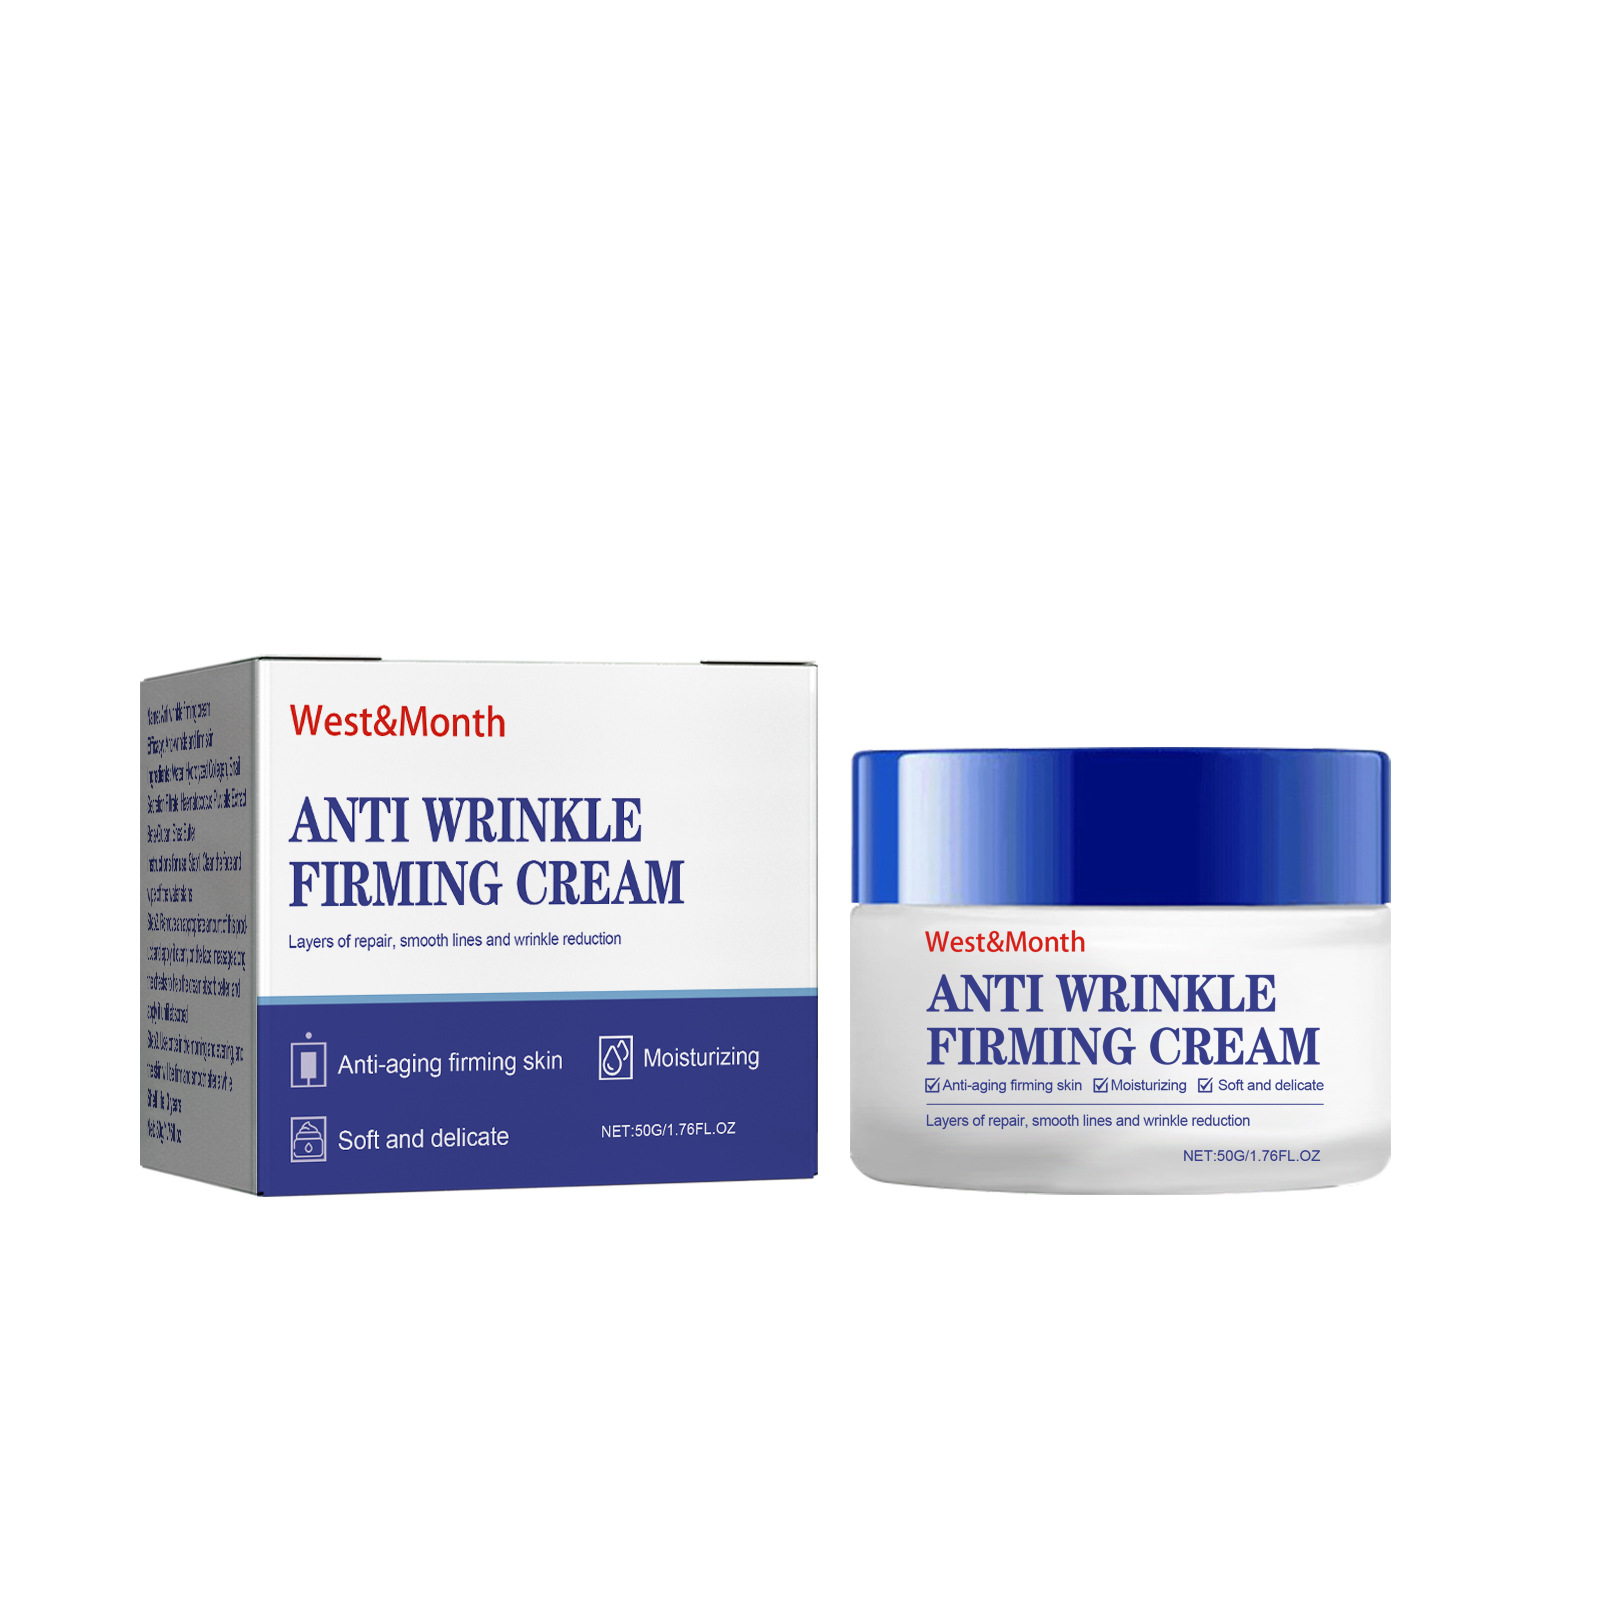 West & Month Anti-Wrinkle Firming Cream Firming Skin Fine Lines Lifting Head Lines Moisture Replenishment Cream